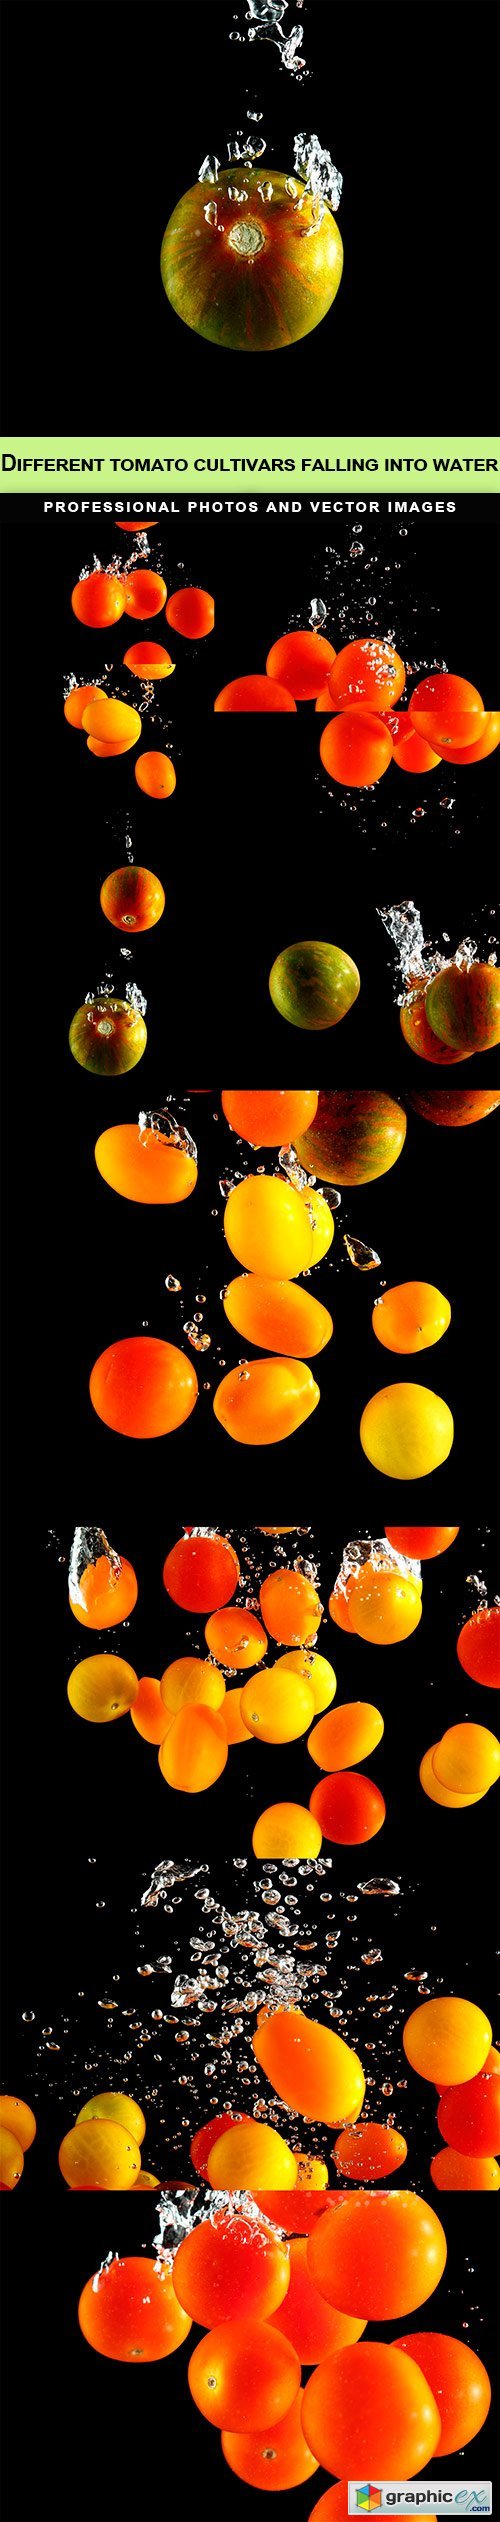 Different tomato cultivars falling into water - 11 UHQ JPEG